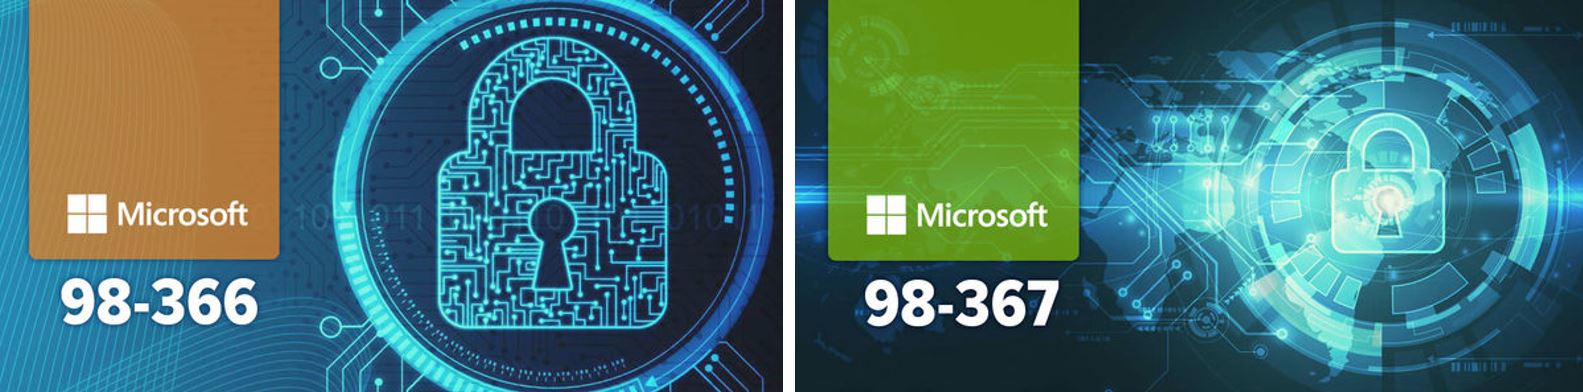 Microsoft Network and Security Fundamentals Certification Bundle